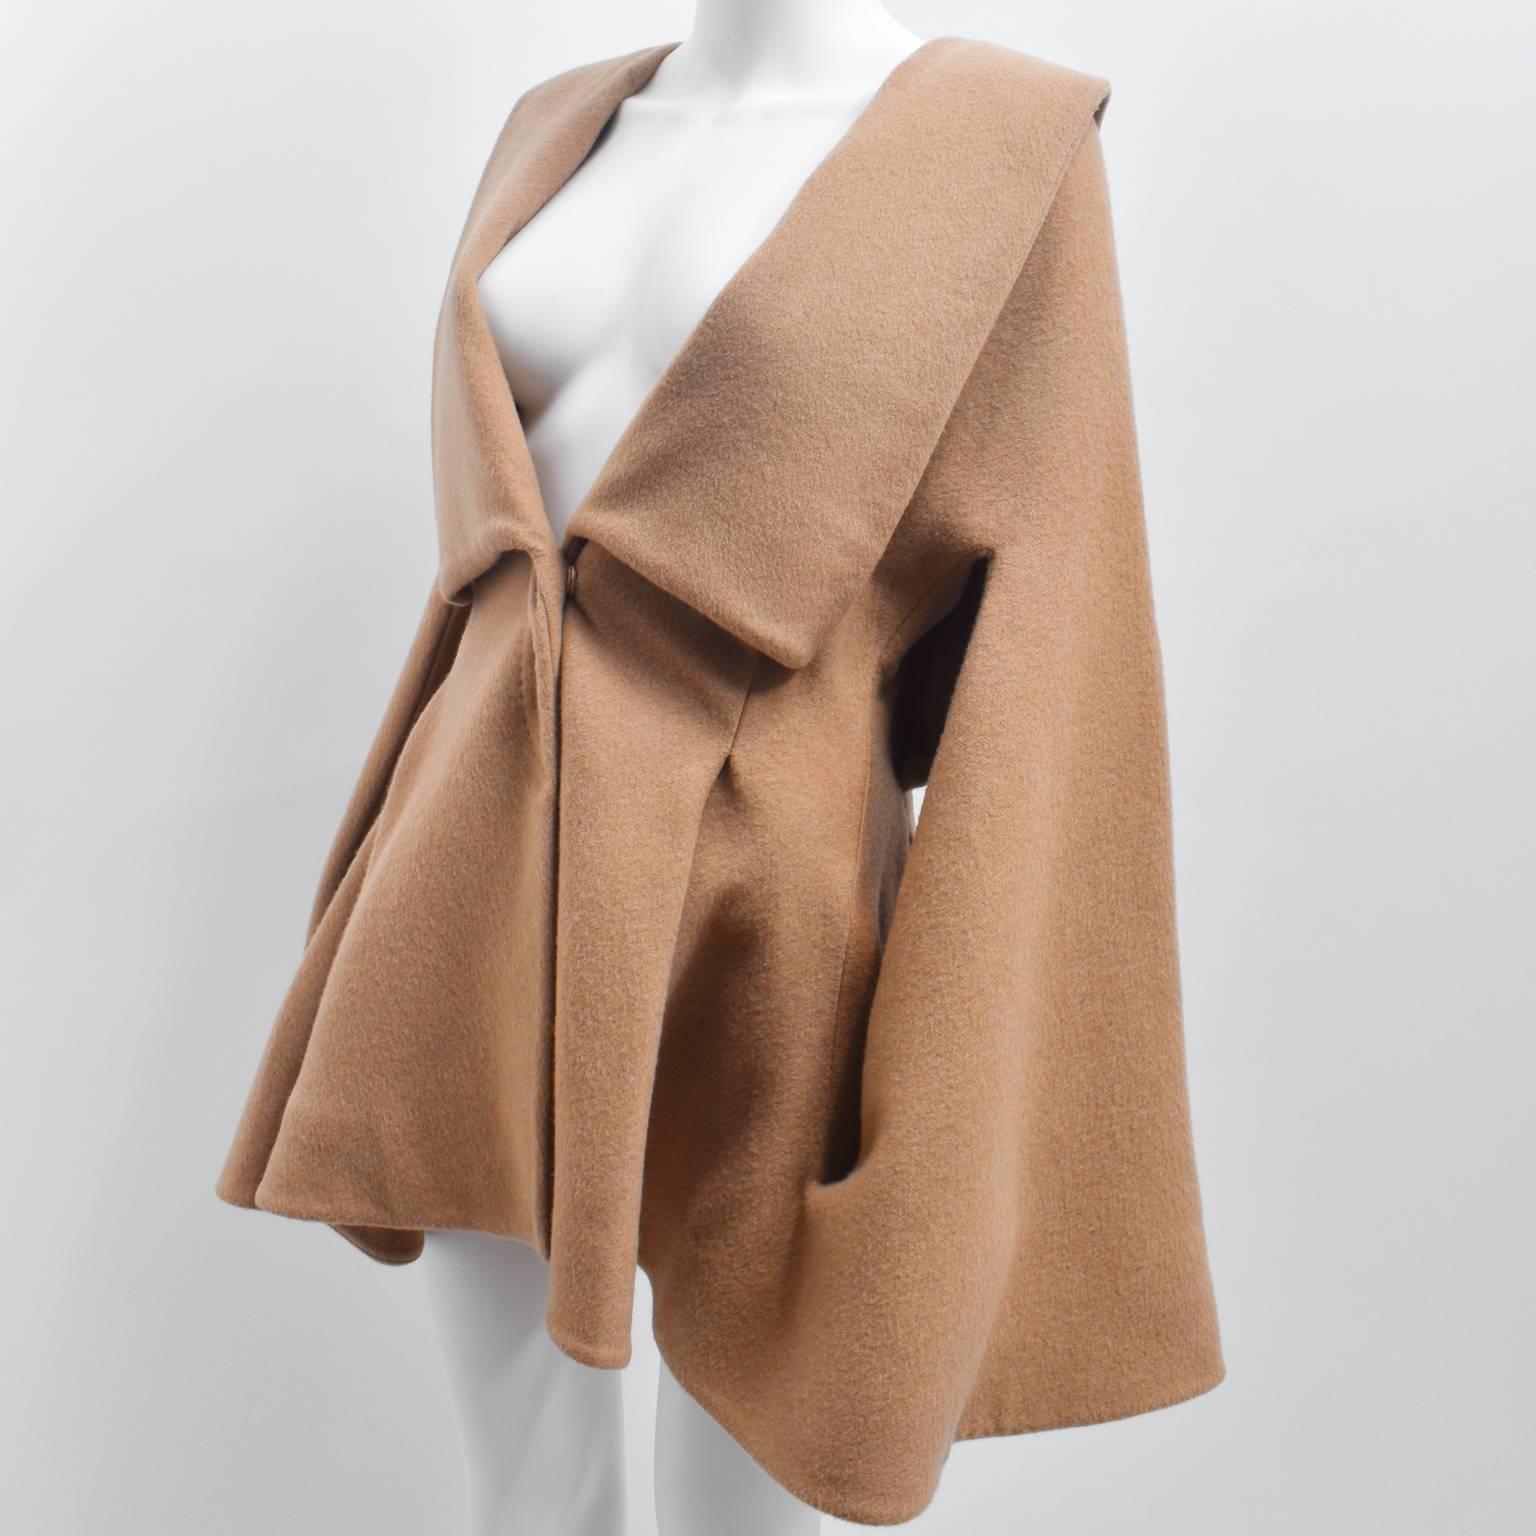 A beautiful Alexander McQueen camel coat made from soft cashmere. The coat has an unique shape; with a large oversize collar, fitted waist, and softly pleated bottom. The coat features exaggerated bell sleeves that are connected to the main body of